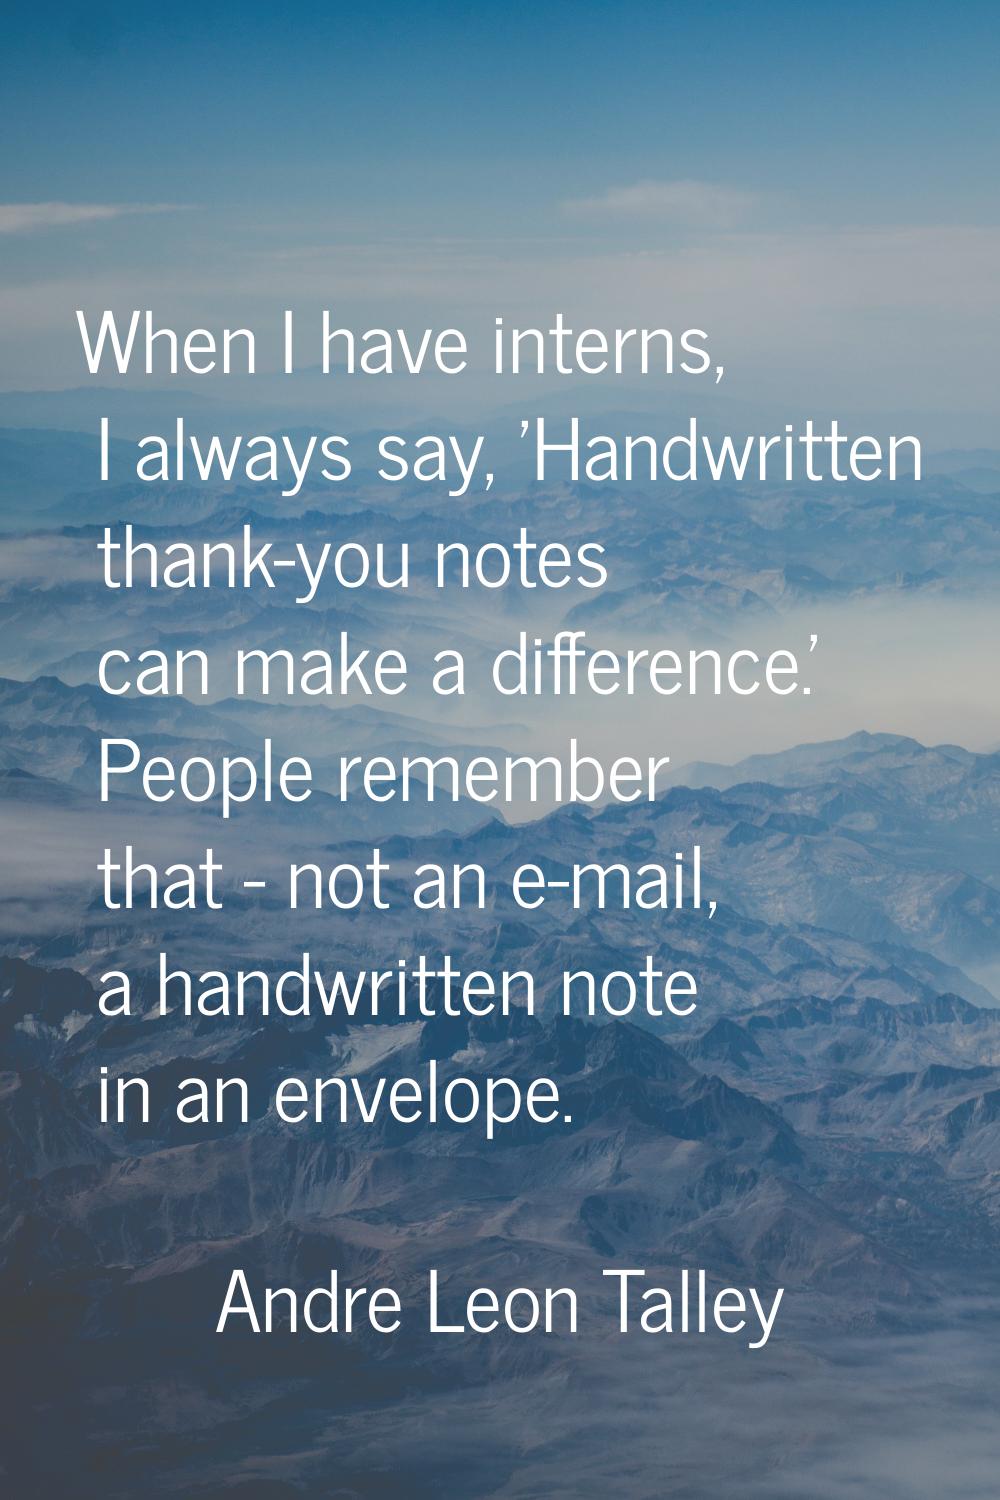 When I have interns, I always say, 'Handwritten thank-you notes can make a difference.' People reme